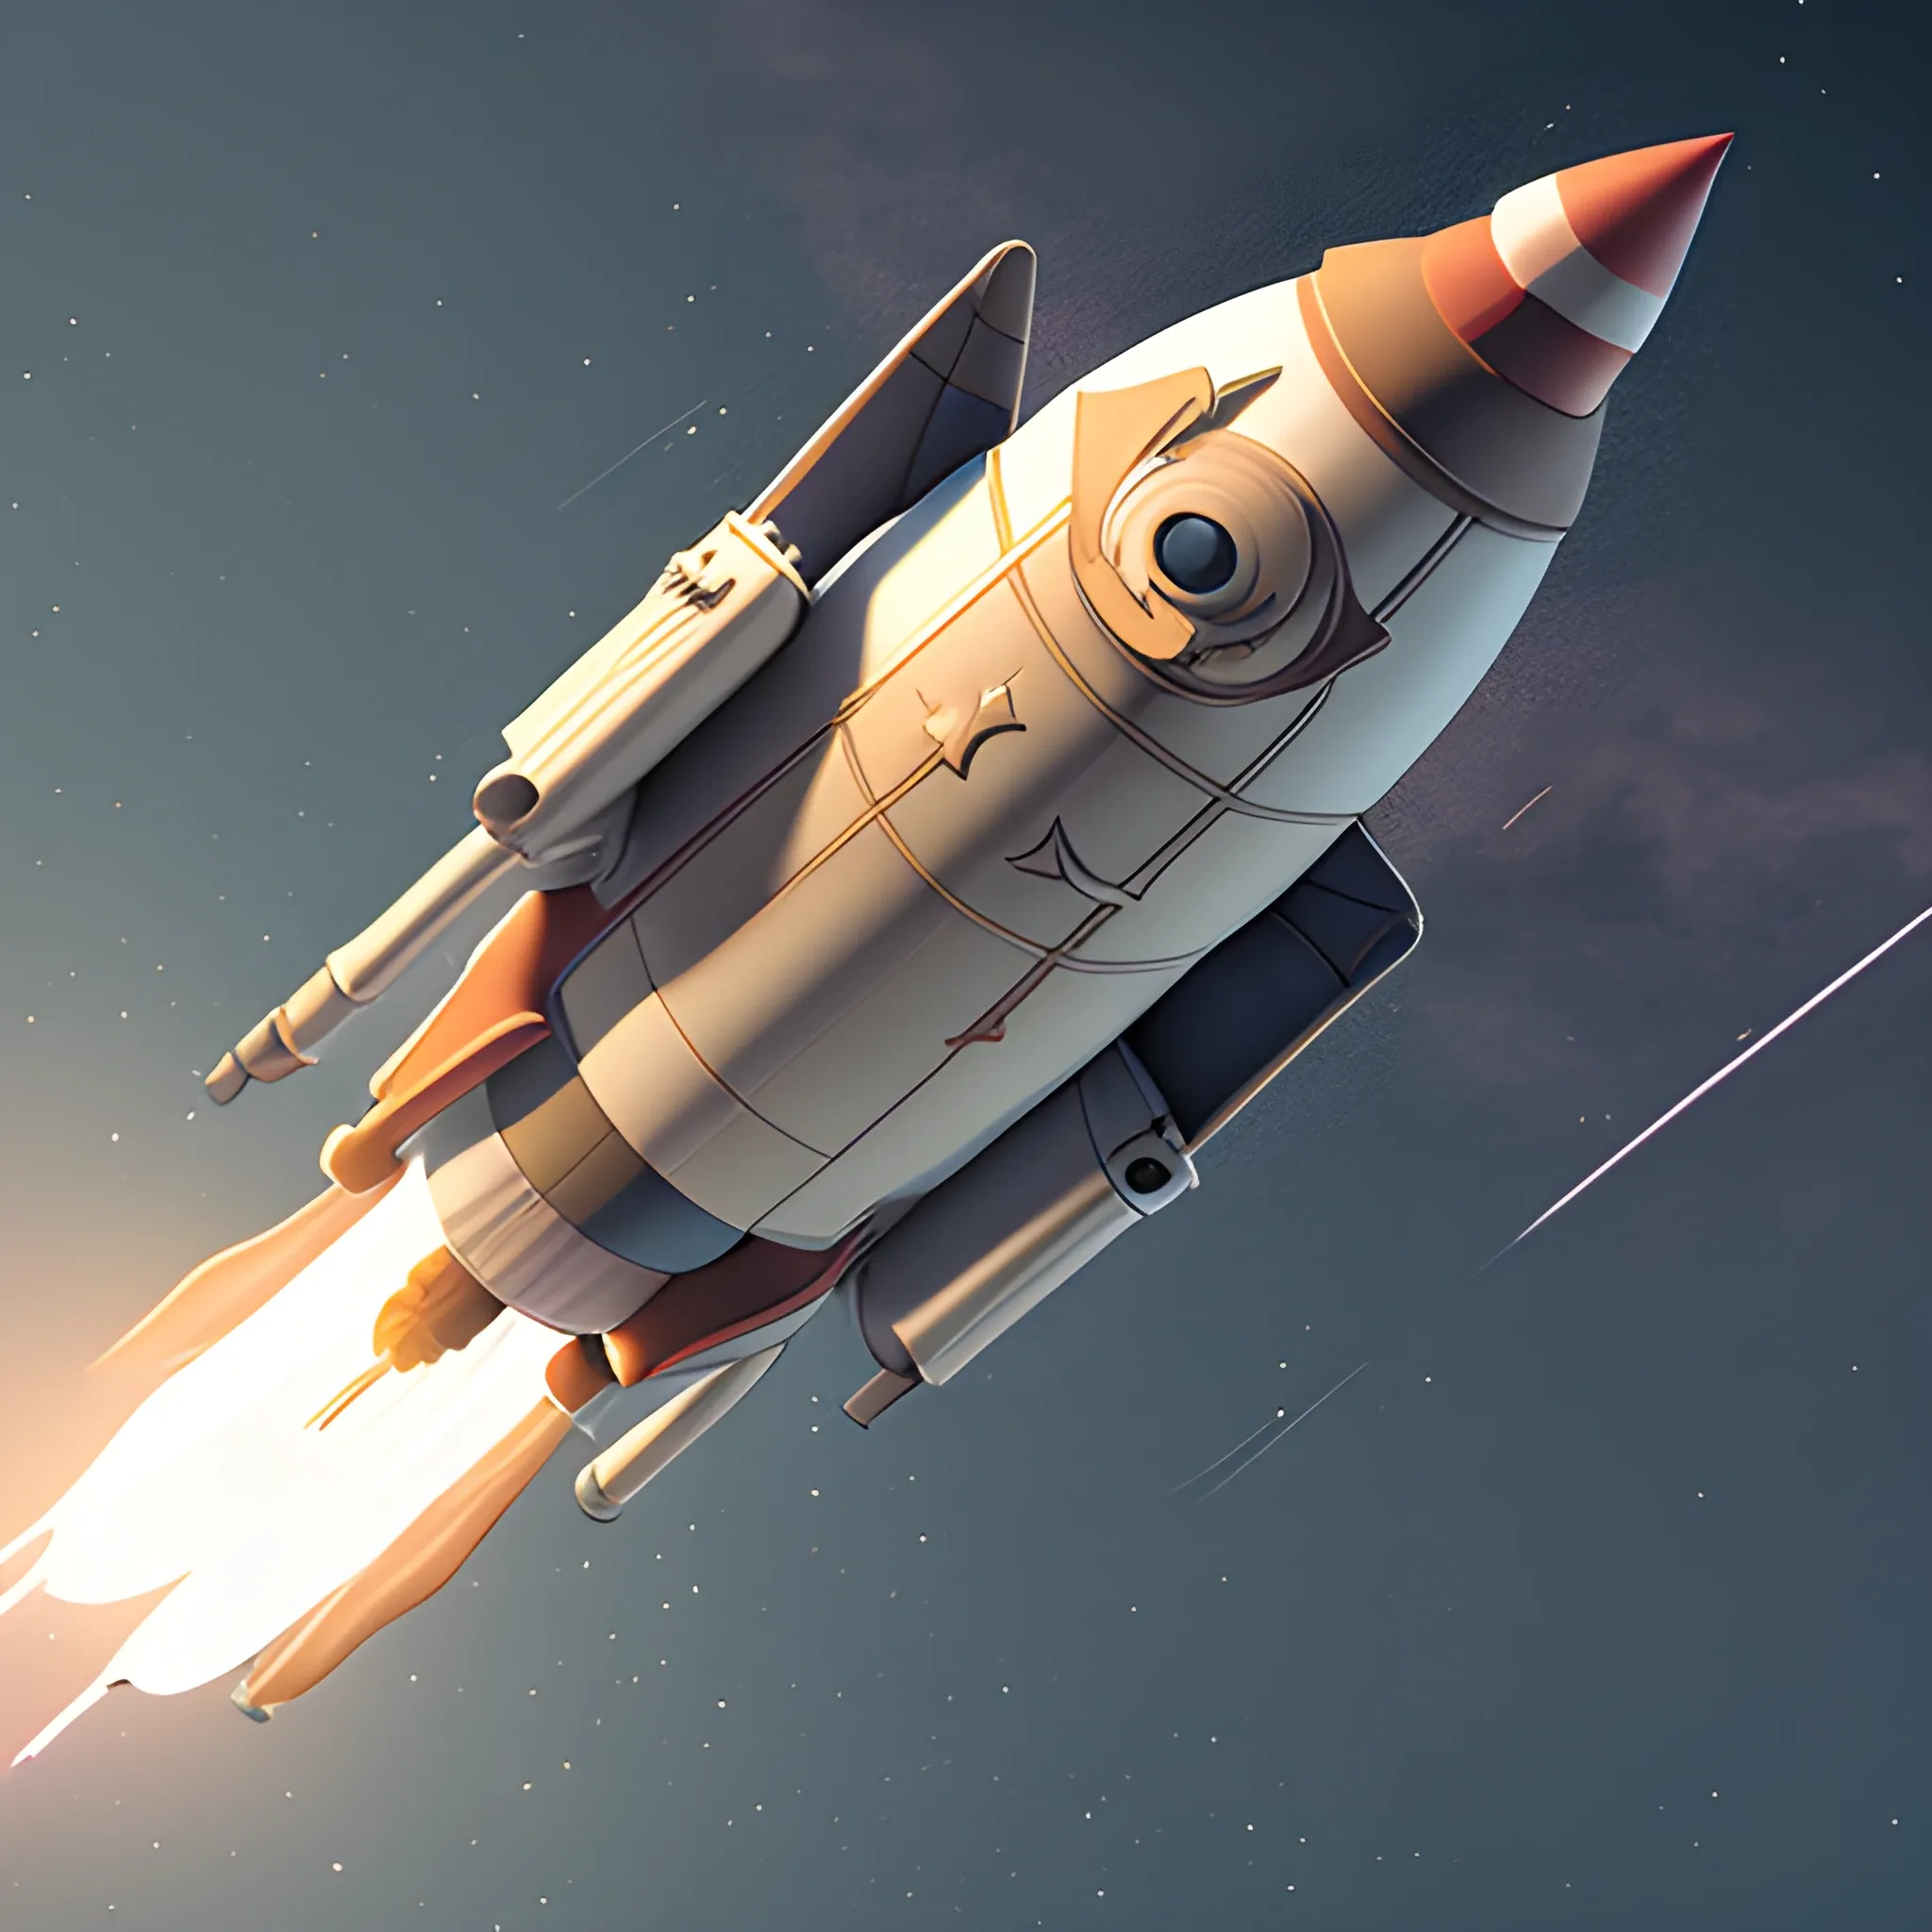 Animated rocket blasting off into space, 3D